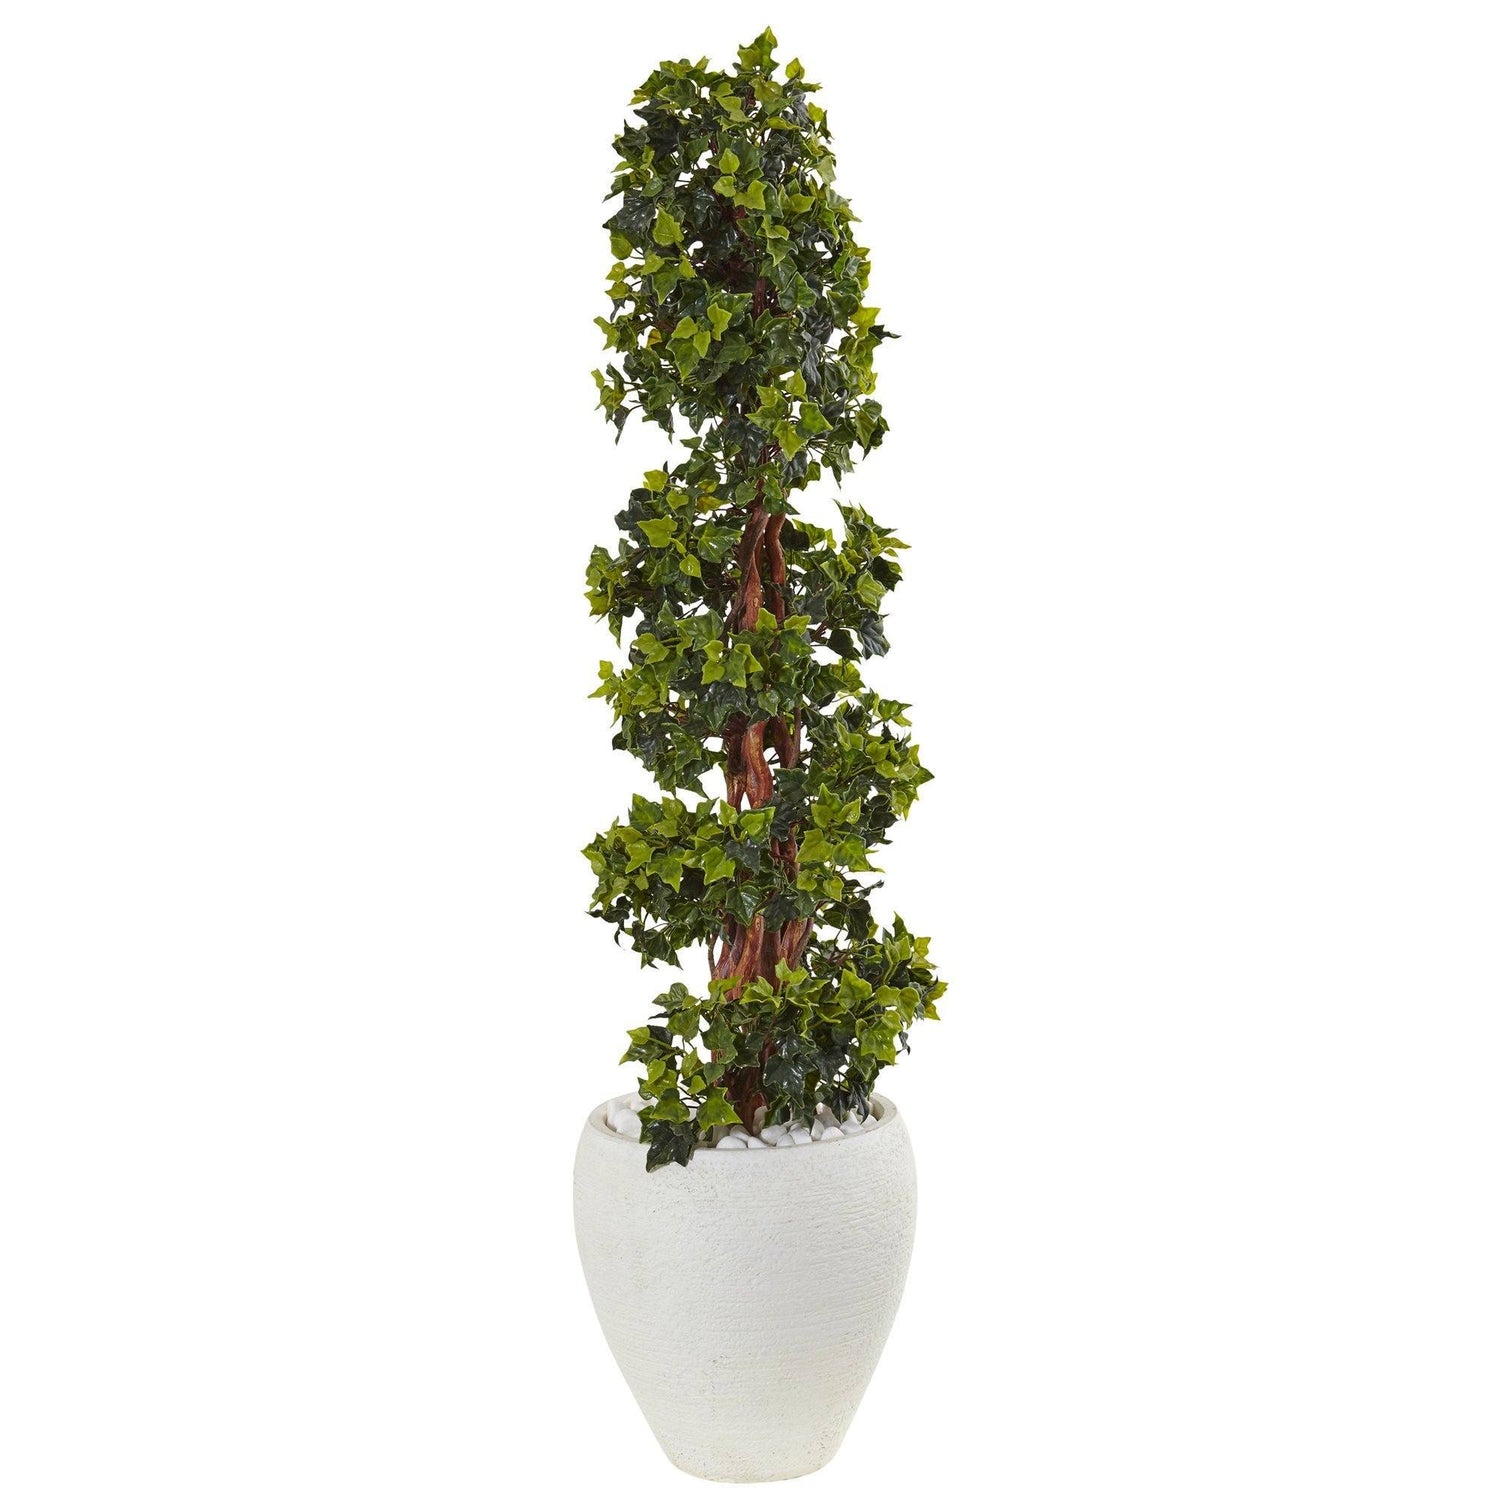 4’ English Ivy Topiary Tree in White Oval Planter UV Resistant (Indoor/Outdoor)